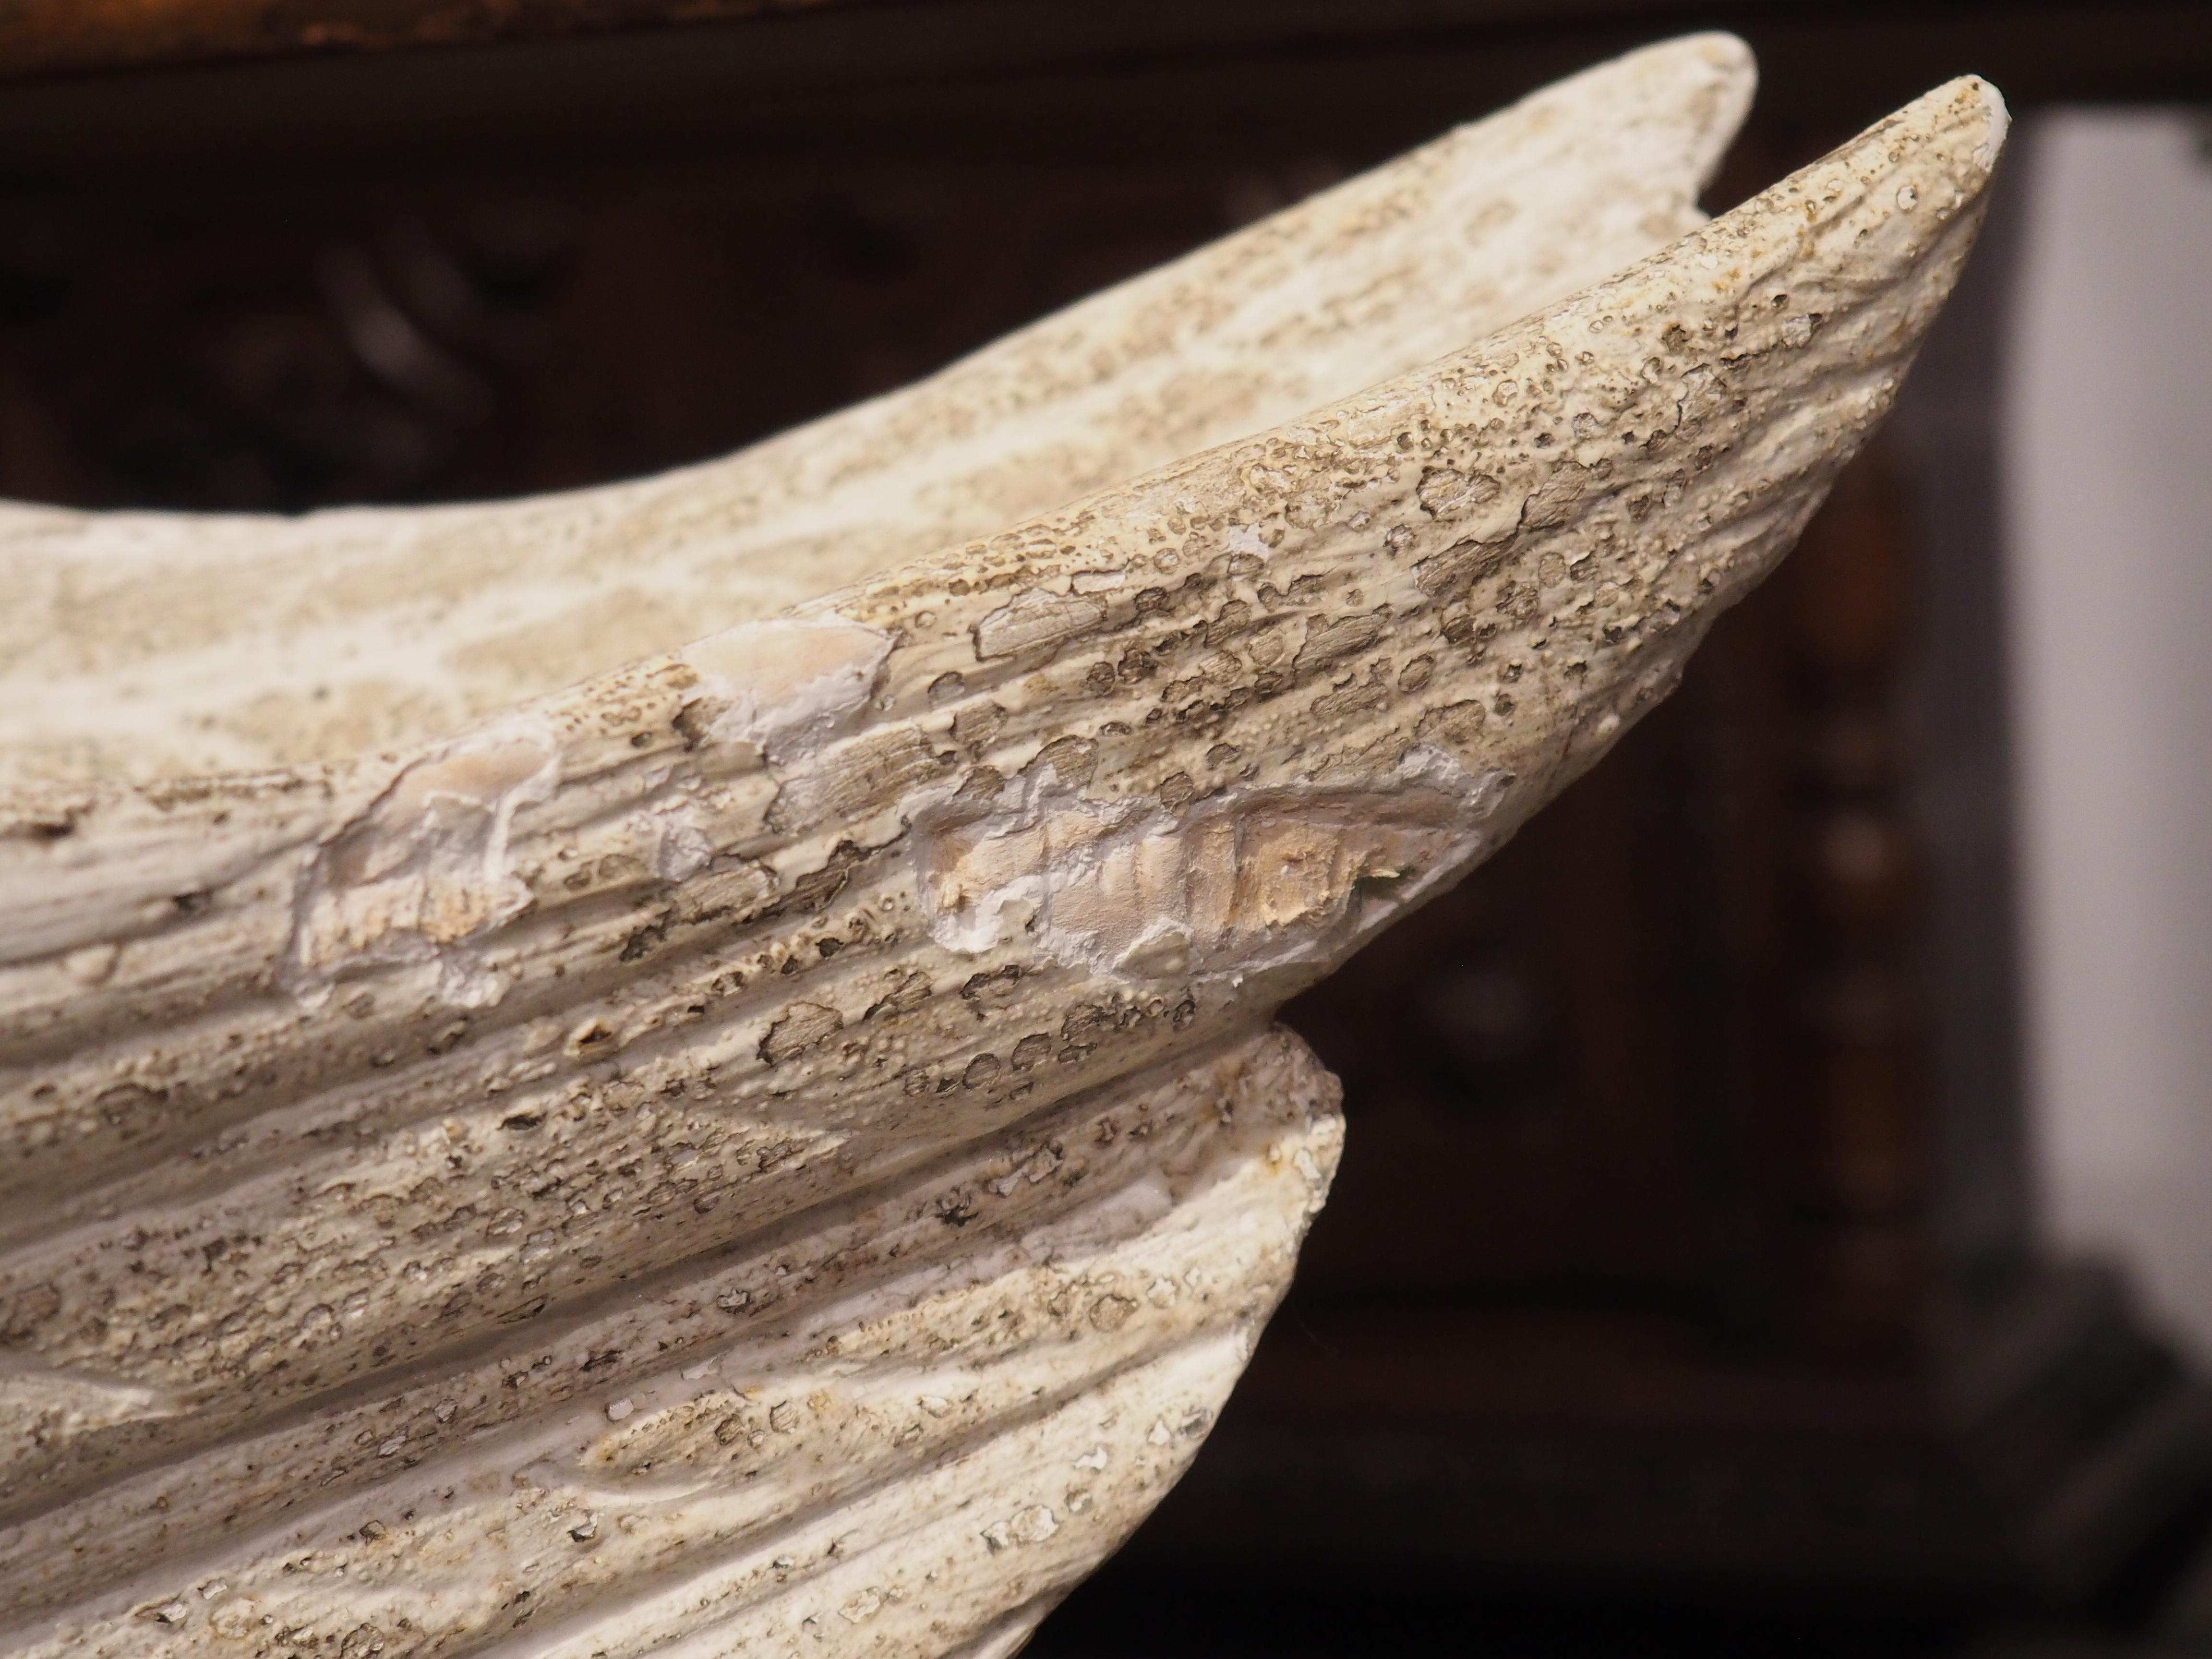 Hand carved in Italy, this large carved and white painted wooden swan planter is every bit as graceful as the actual bird it depicts. Based on the curved neck and downward pointing bill, this is most likely a mute swan, which is native to much of